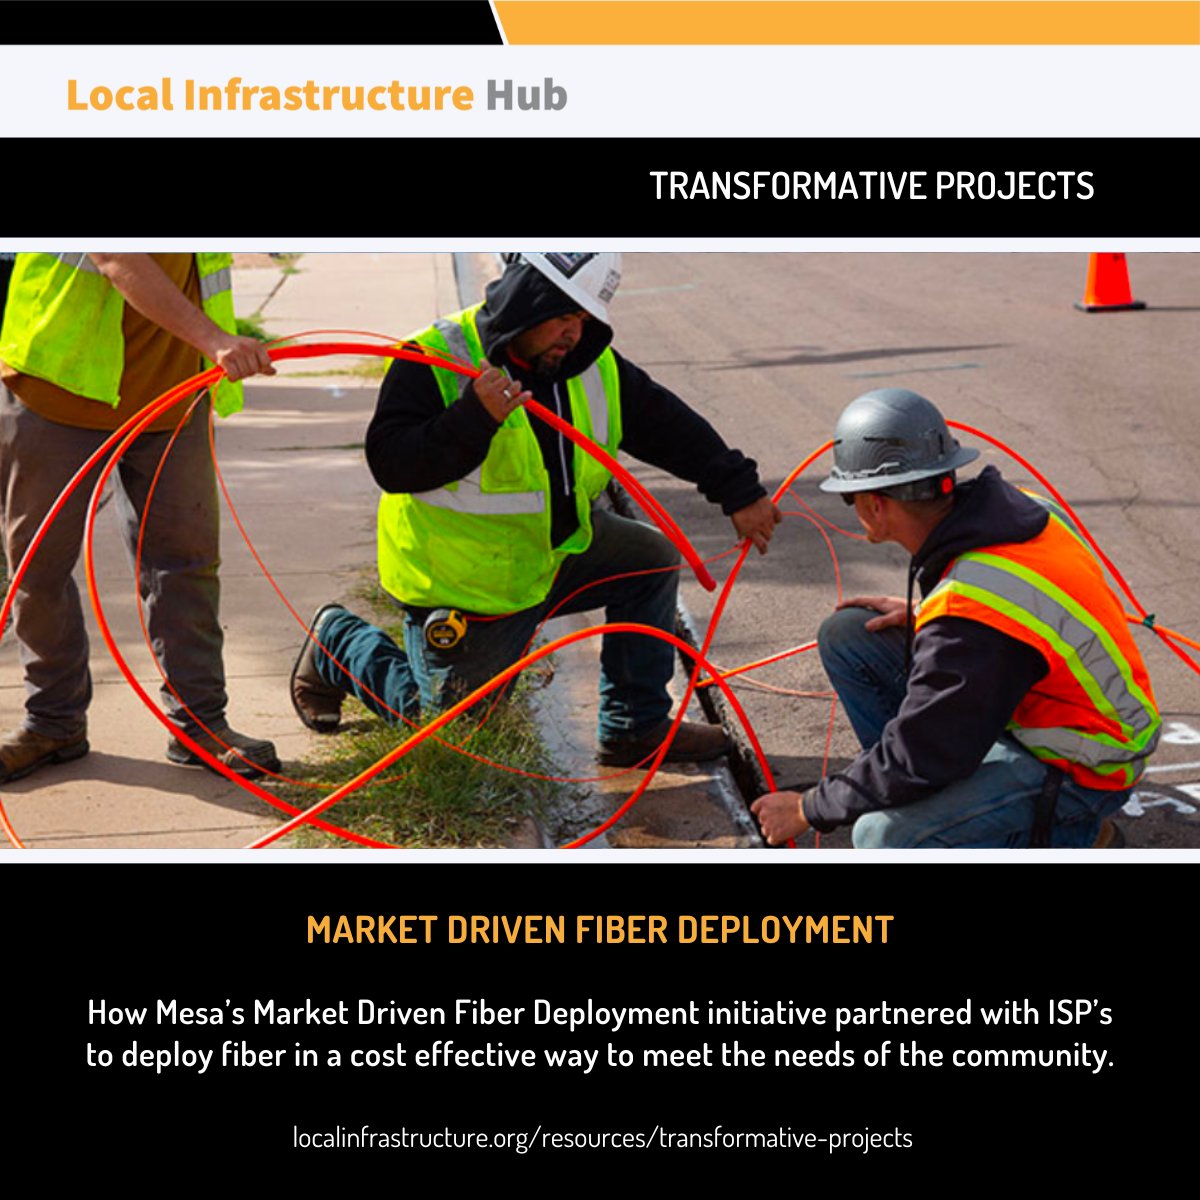 Mesa, AZ’s Market Driven Fiber Deployment initiative shows how local governments and internet service providers (ISPs) can efficiently partner and deploy fiber in a cost effective way to meet the needs of the community. Learn more about this initiative here:…